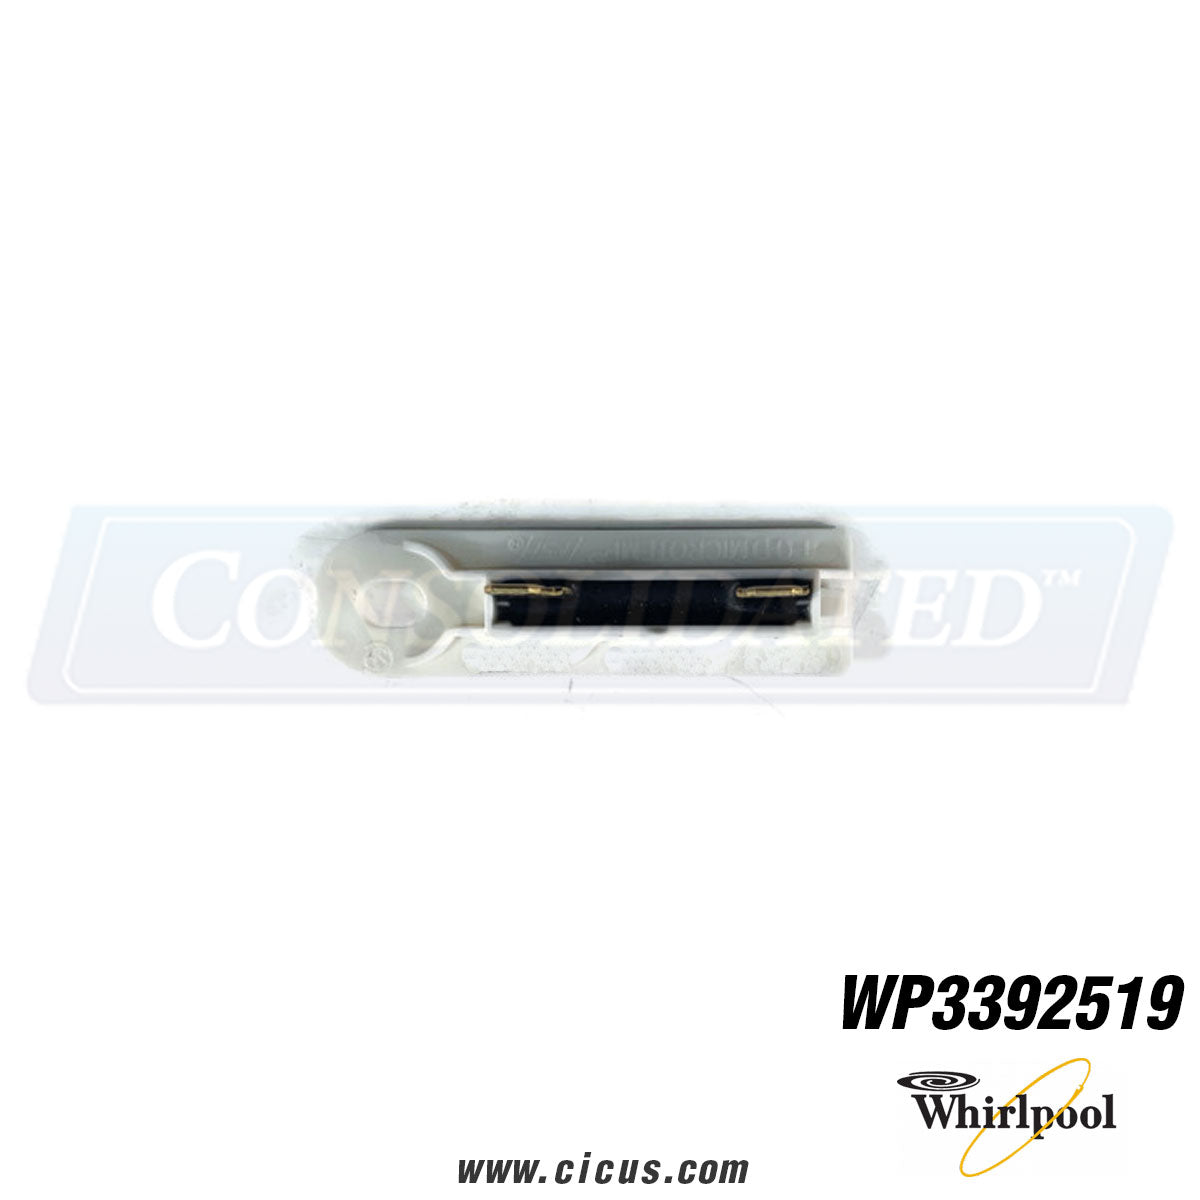 Whirlpool Thermal Fuse (91C) [WP3392519]